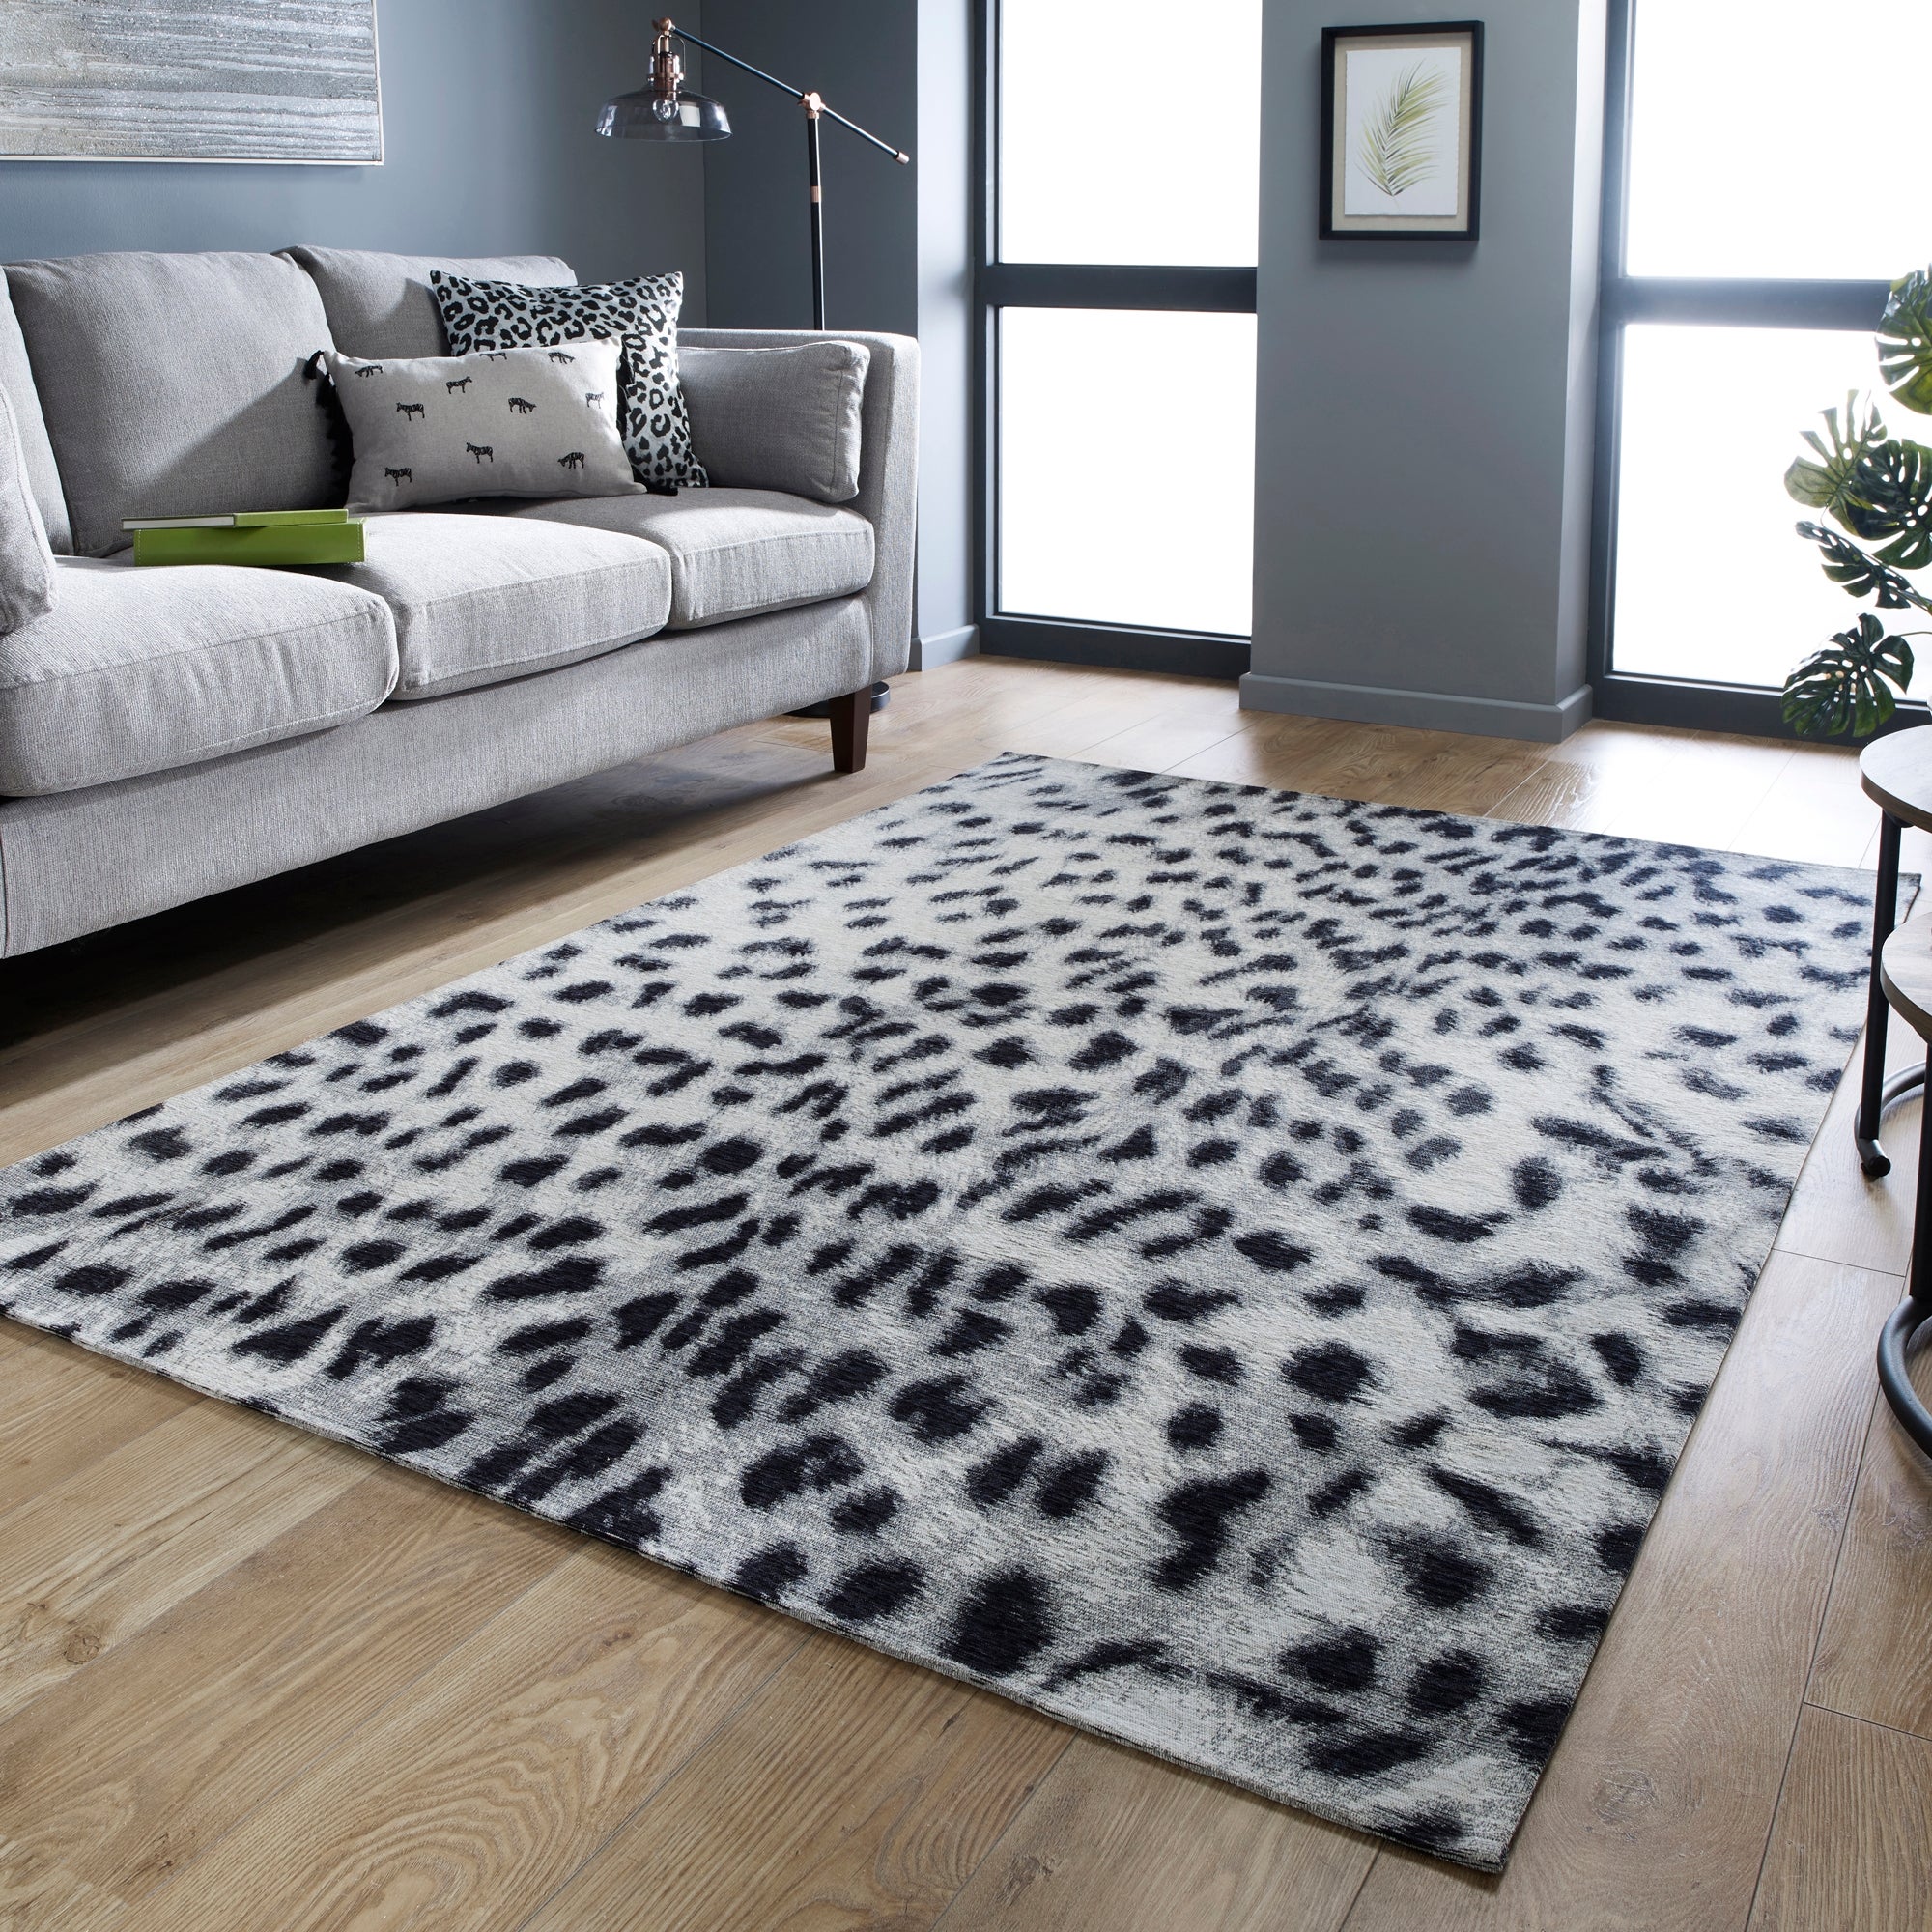 Snow Leopard Rug Grey And White